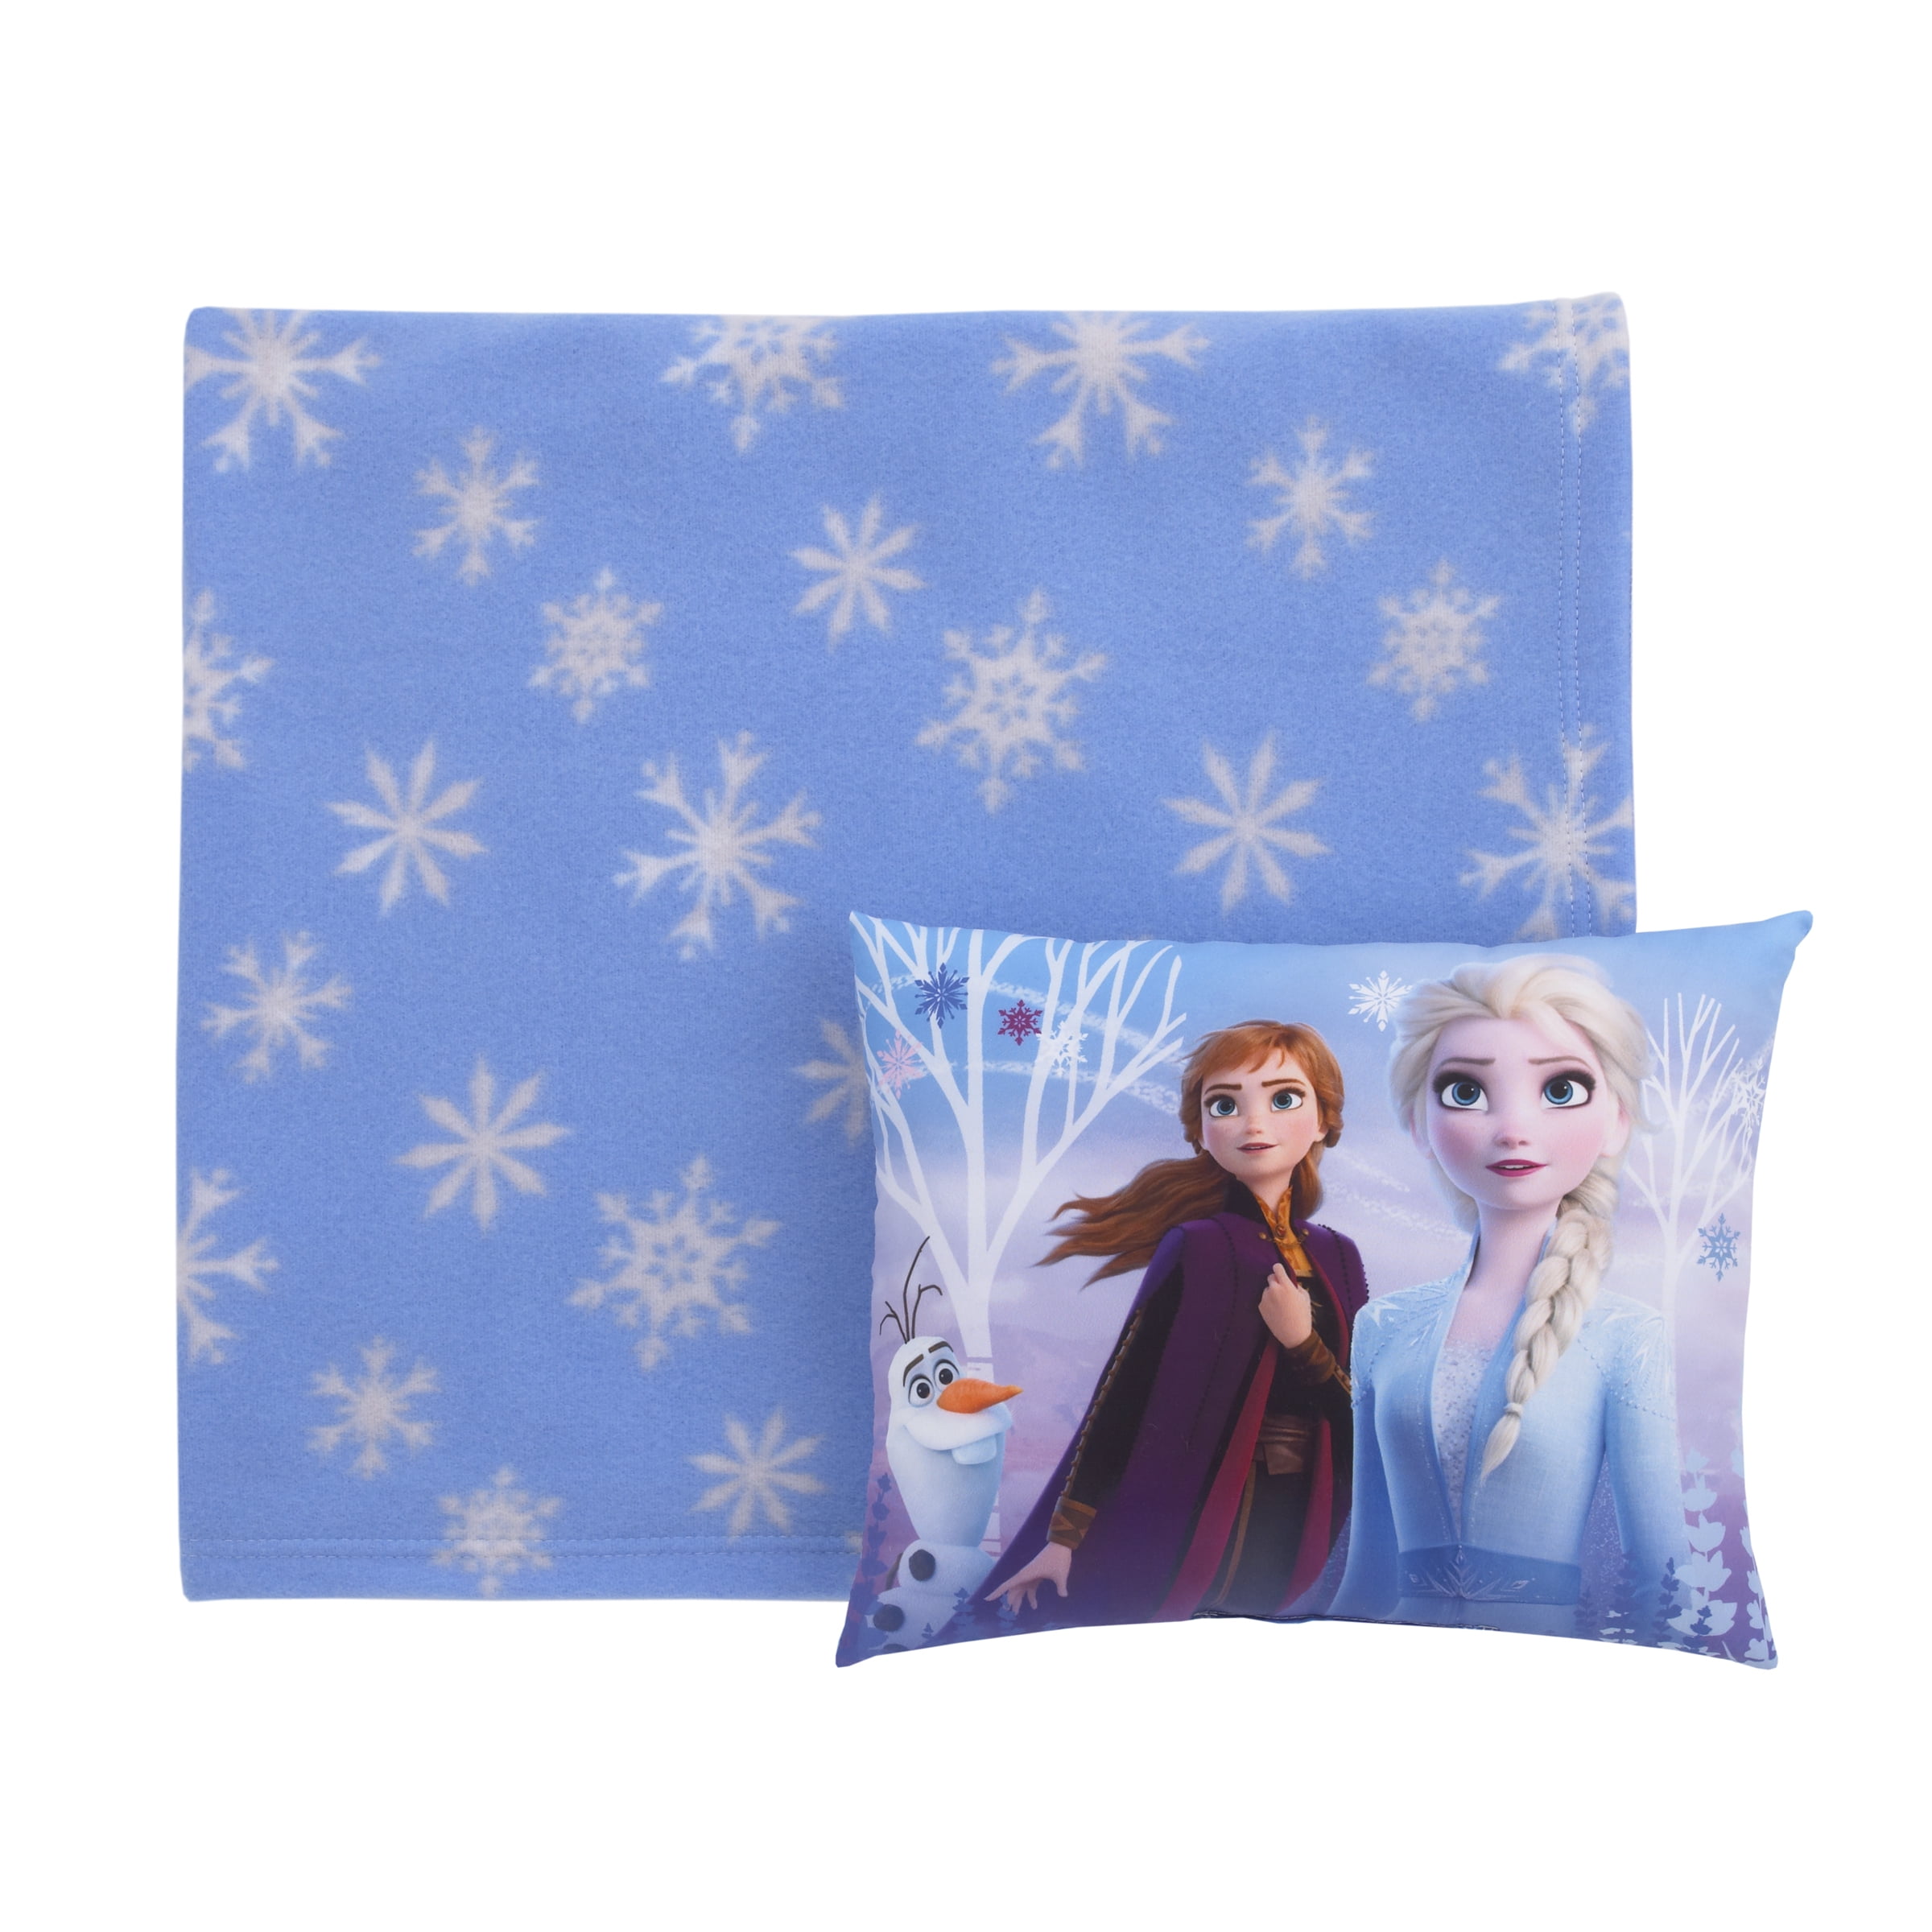 NWT Disney Frozen 2 Character Pillow And Throw Blanket 2 piece set 